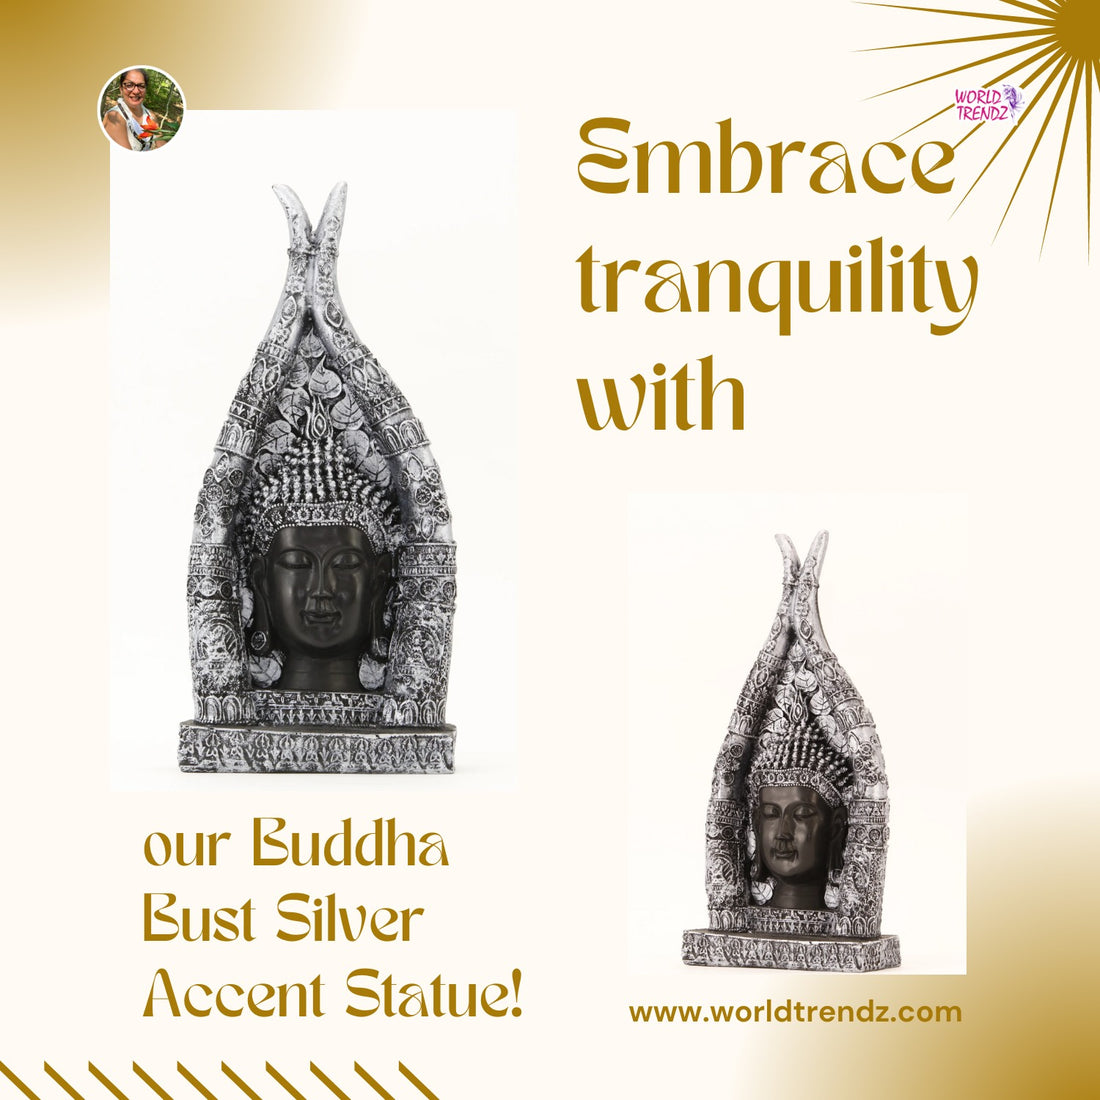 Discover Peace and Tranquility with the Buddha Bust Silver Accent Statue by WorldTrendz